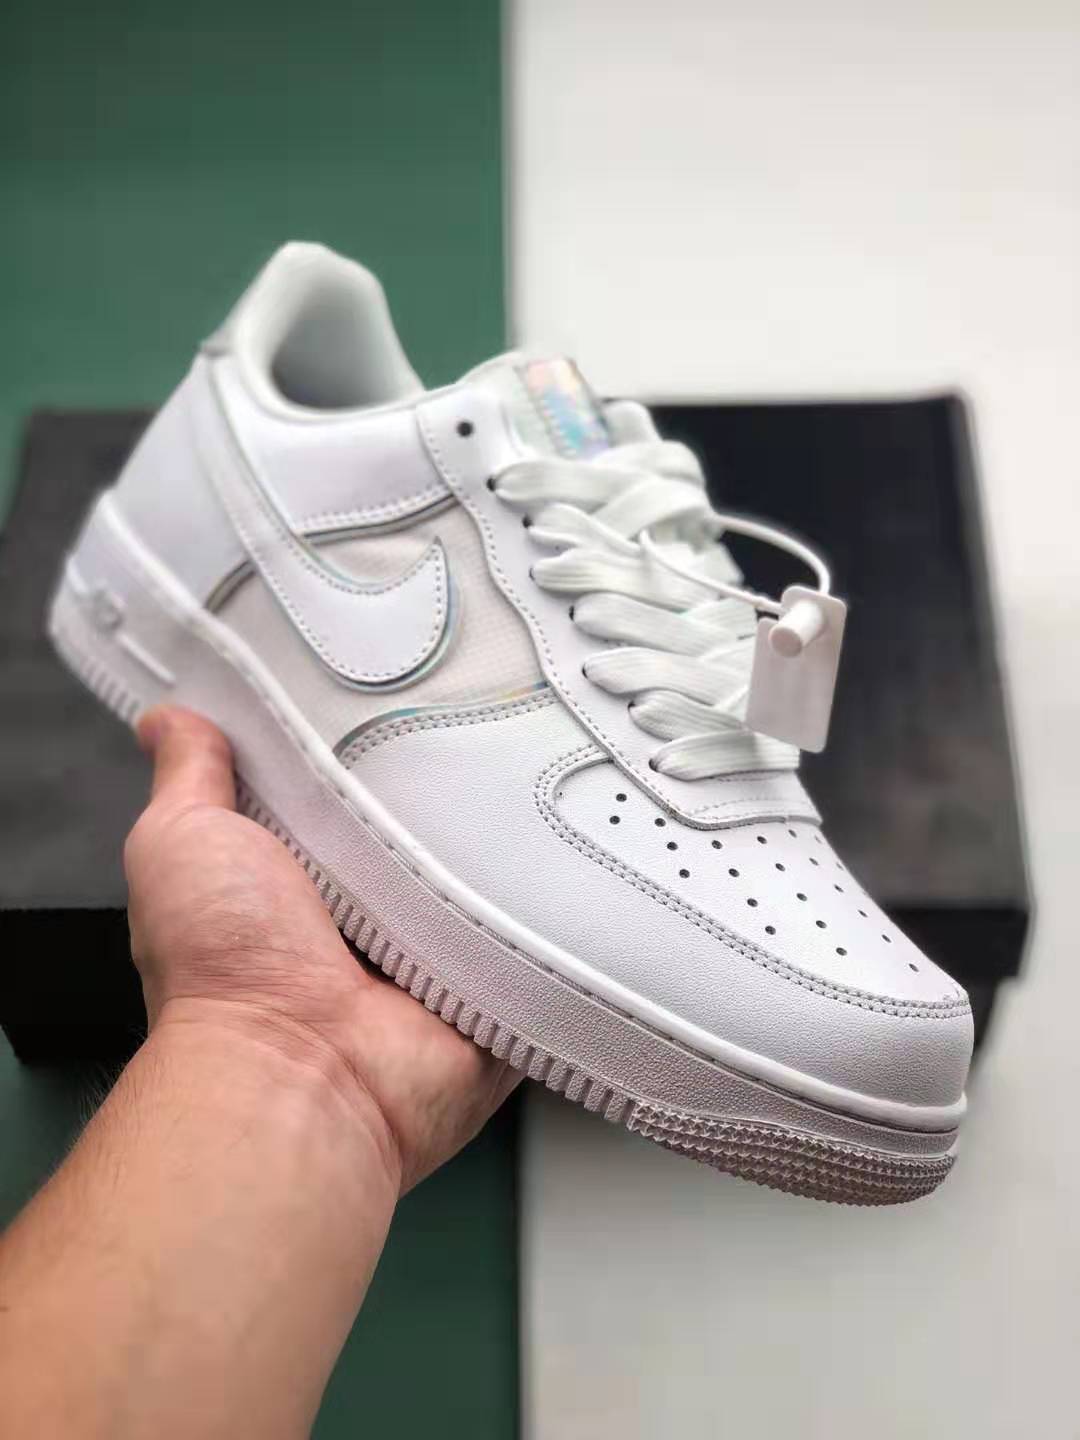 Nike Air Force 1 '07 LV8 4 'Triple White' AT6147-100 - Stylish and Premium Sneakers